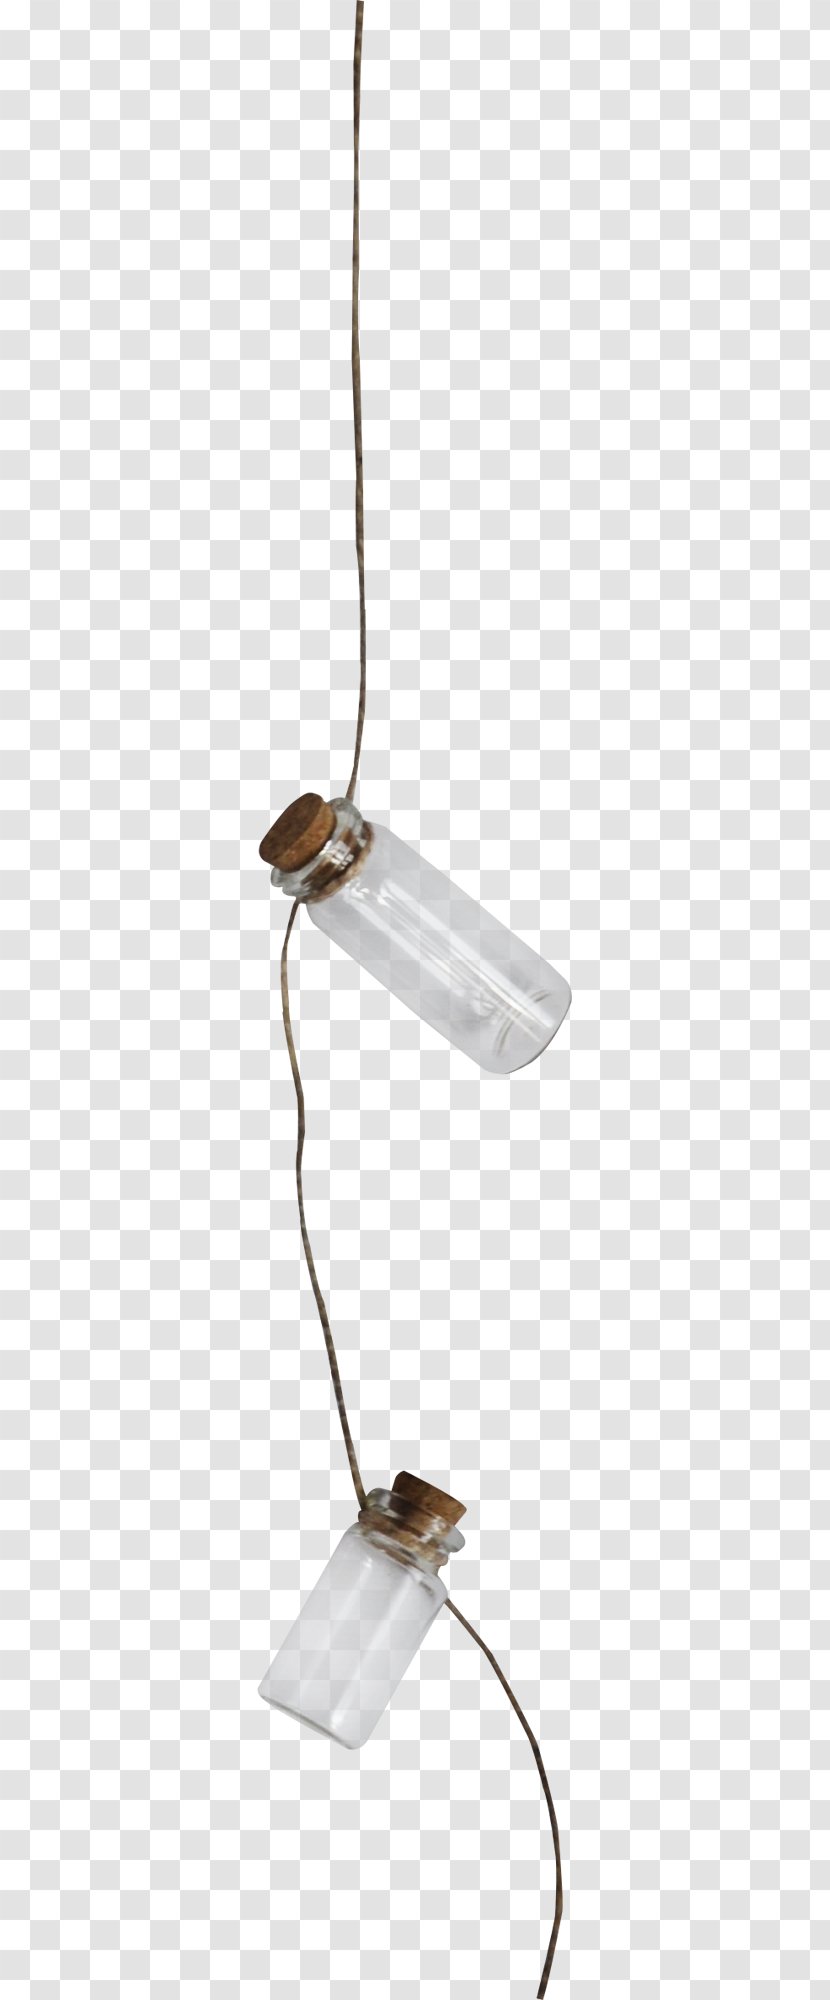 Light Fixture Angle Electric Ceiling - Lamp - Rope Bottles Transparent PNG